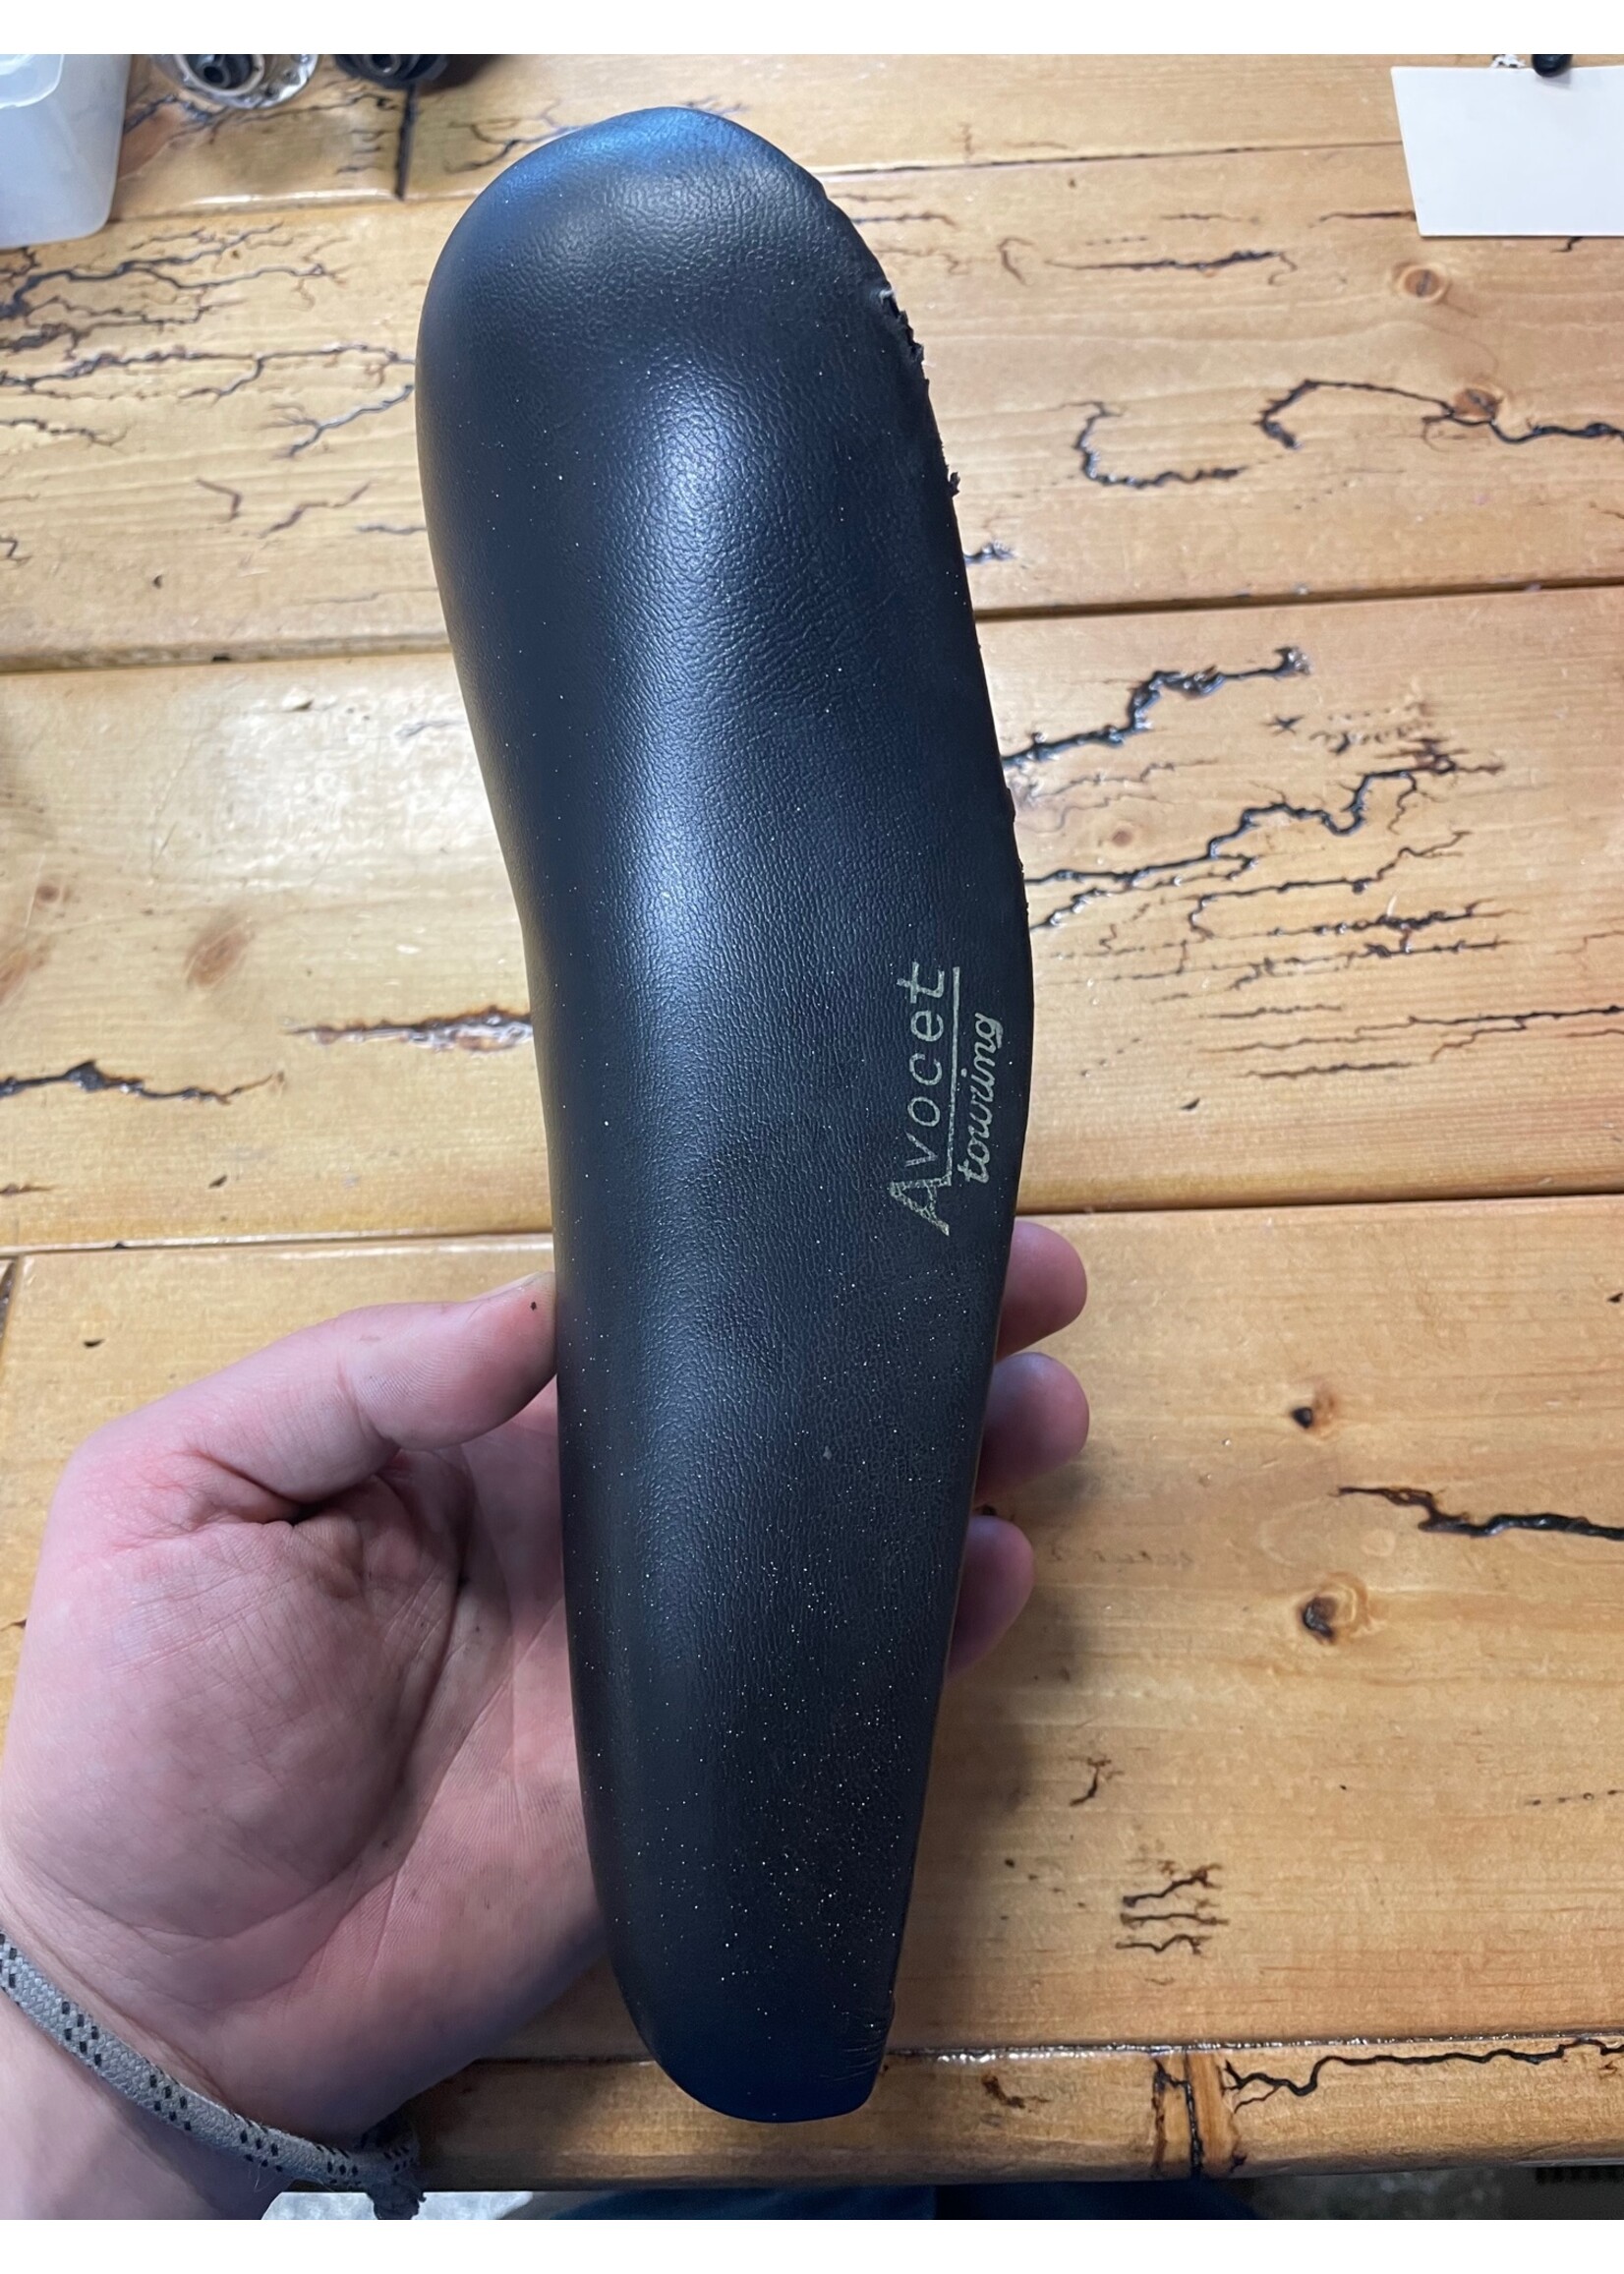 Avocet Touring Saddle - Gringineer Cycles